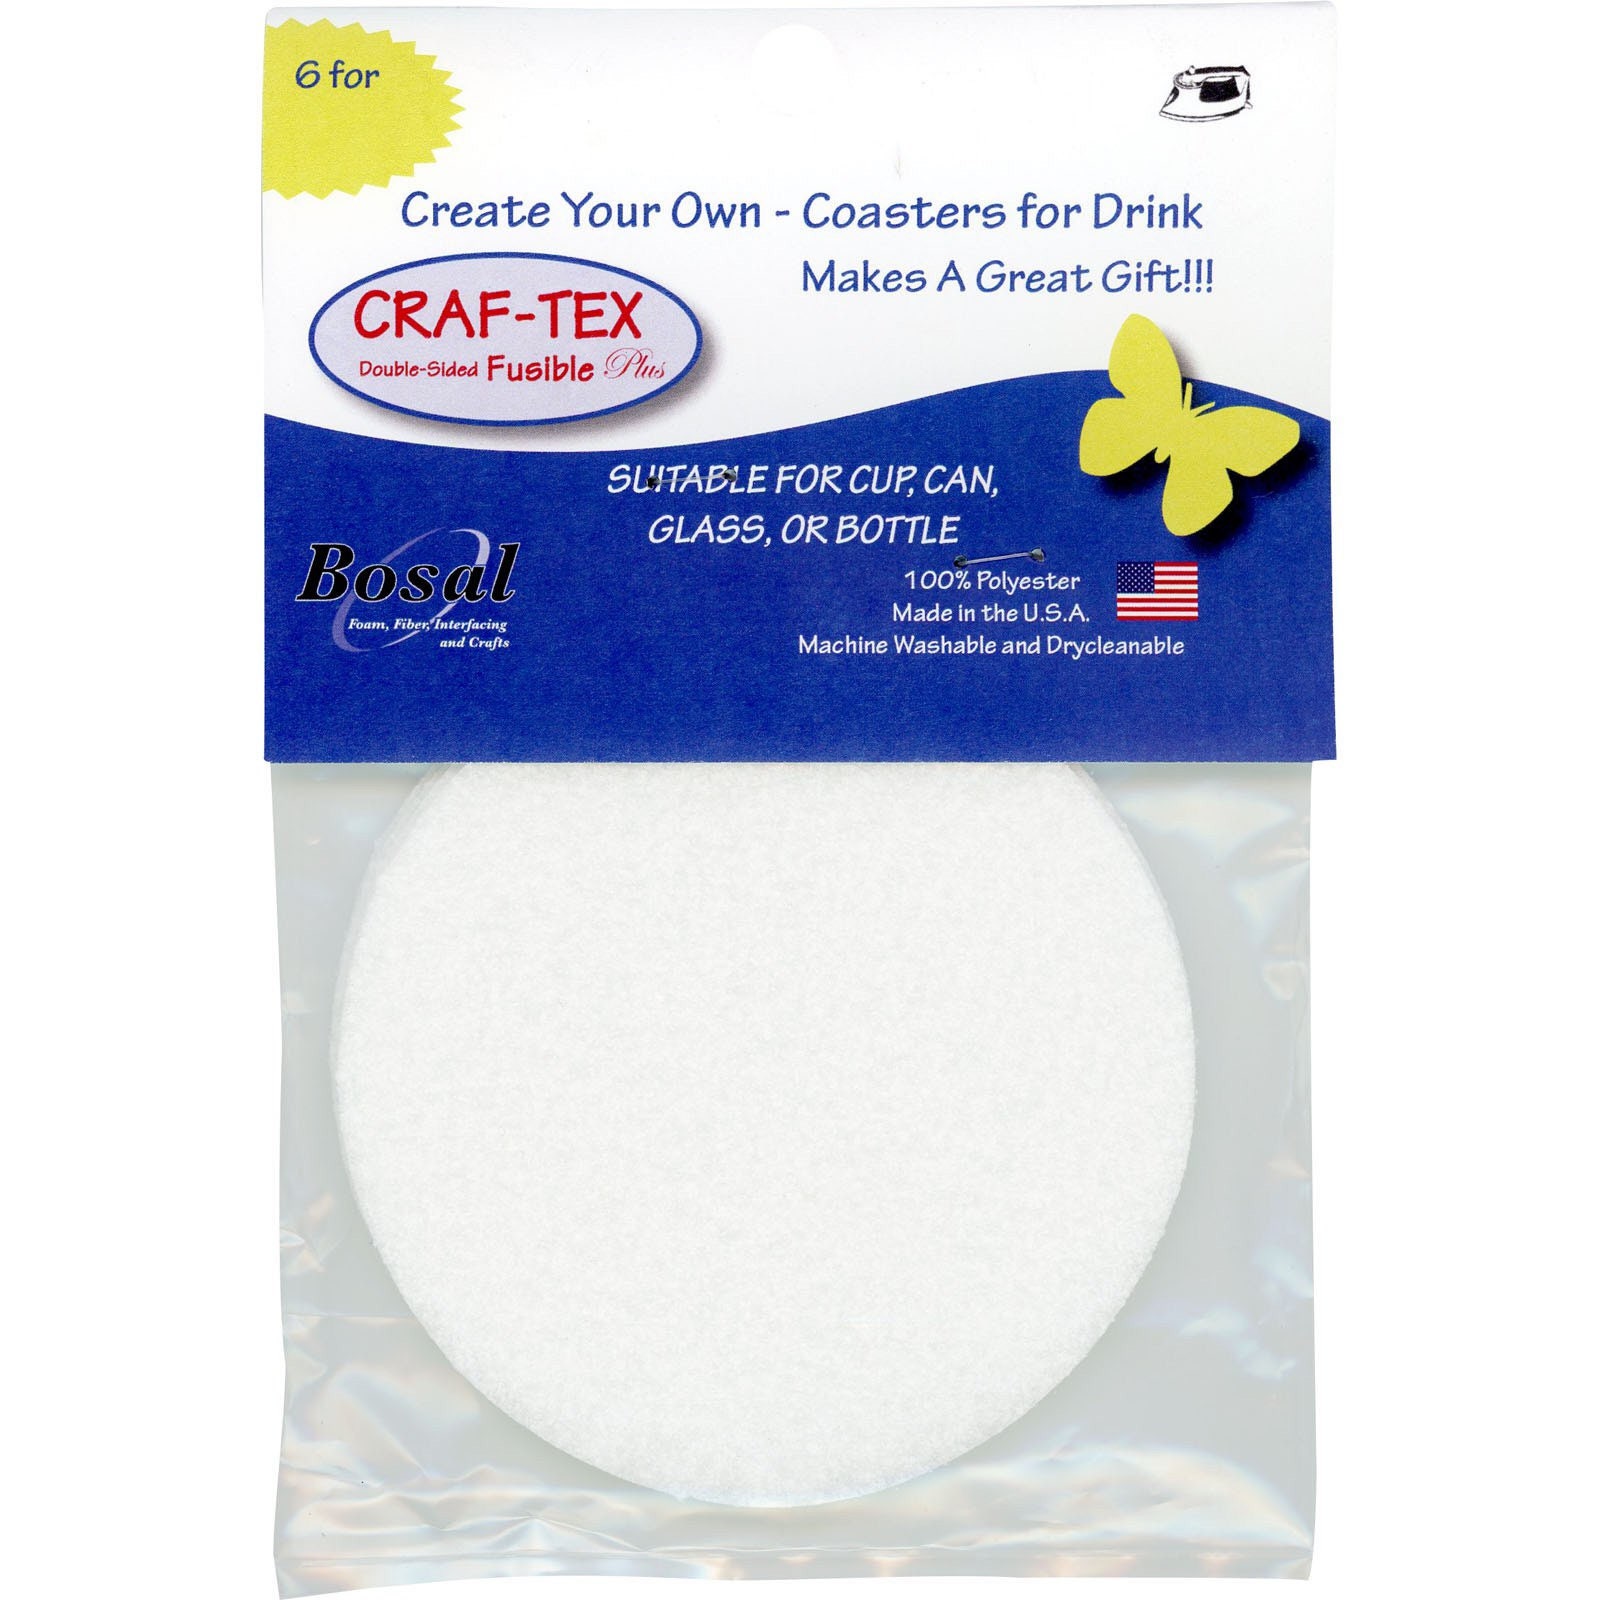 Bosal Heat Moldable Double Sided Fusible Plus 20in X 36in for sale online